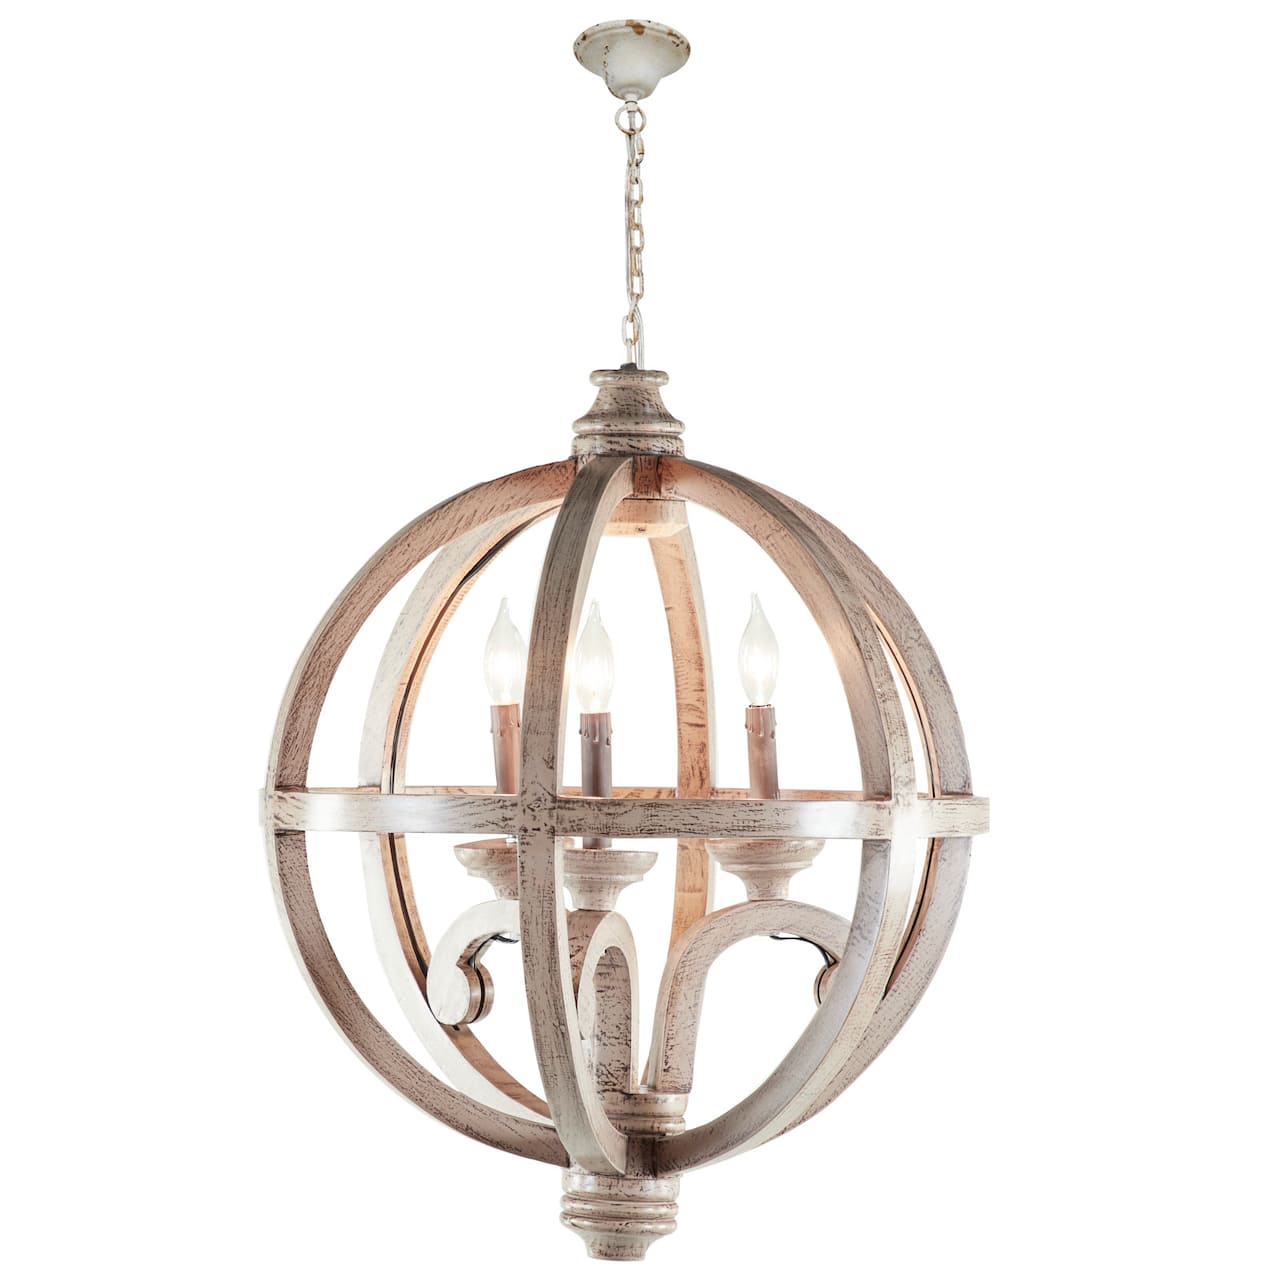 Gold Wood Rustic Caged Chandelier 28